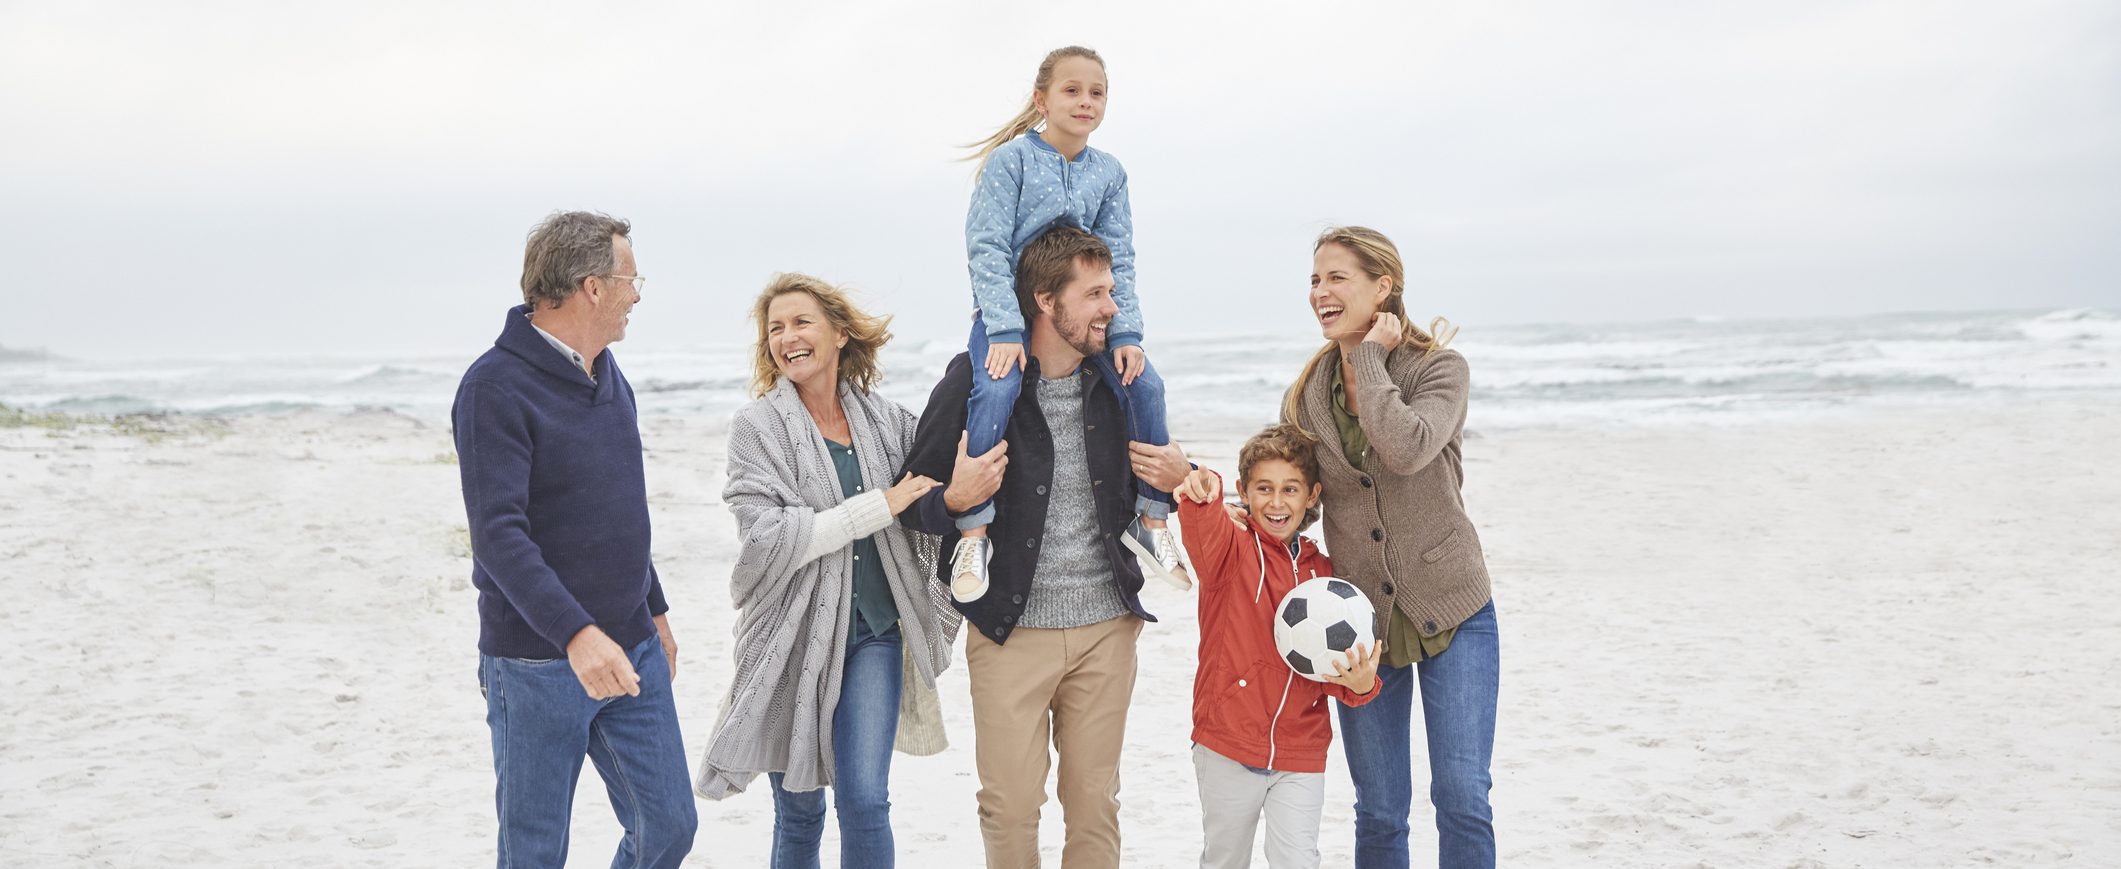 A family, including a grandmother, a grandfather, a   mom, a dad, and two children, walk on a beach together.